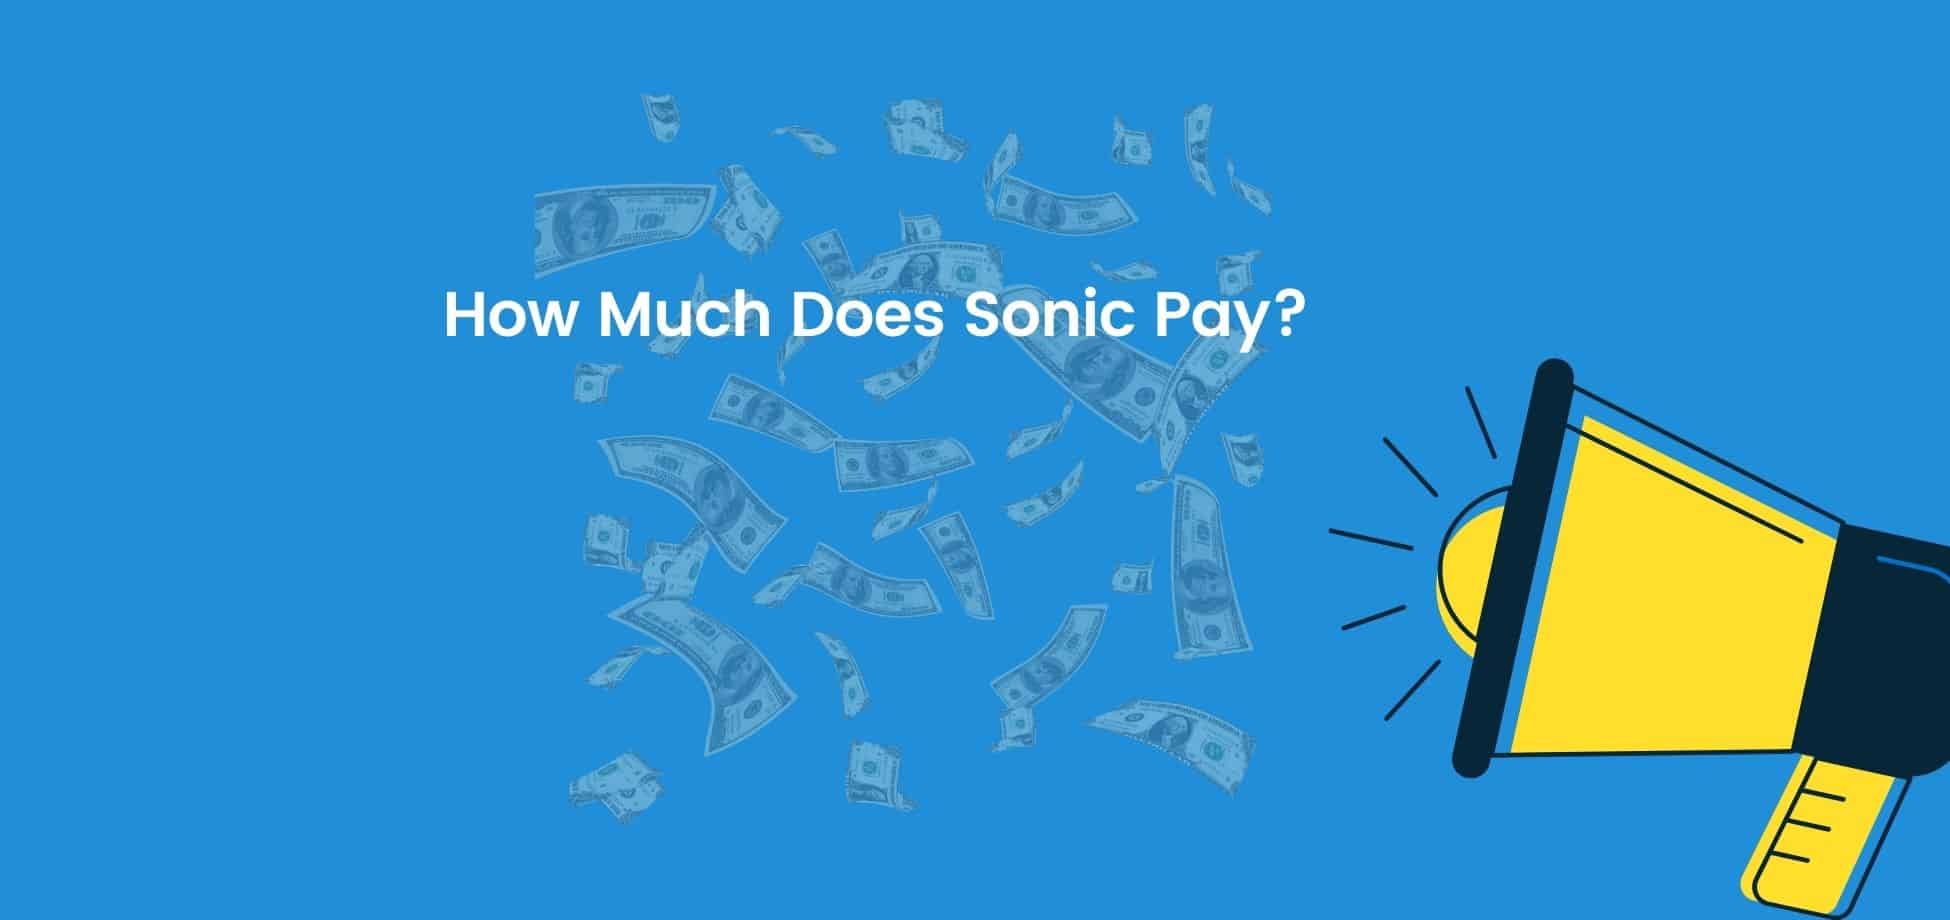 Sonic pays its employees below-average wages but offers unique opportunities to servers who like to roller skate.